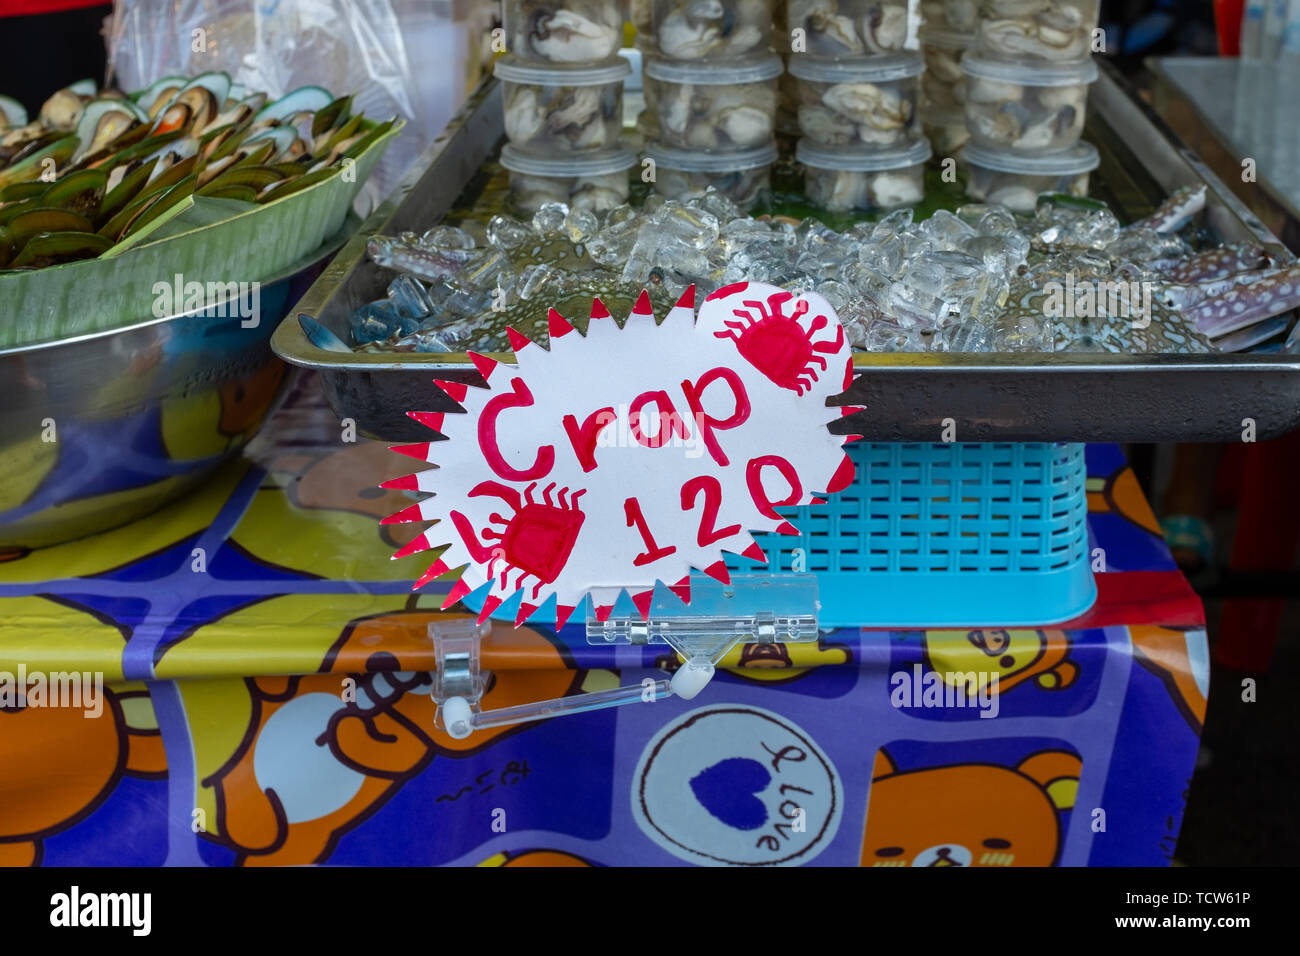 A misspelt food sign at a street food market stall in Krabi, Thailand, the sign reads Crap when it should be Crab, nobody in the image Stock Photo